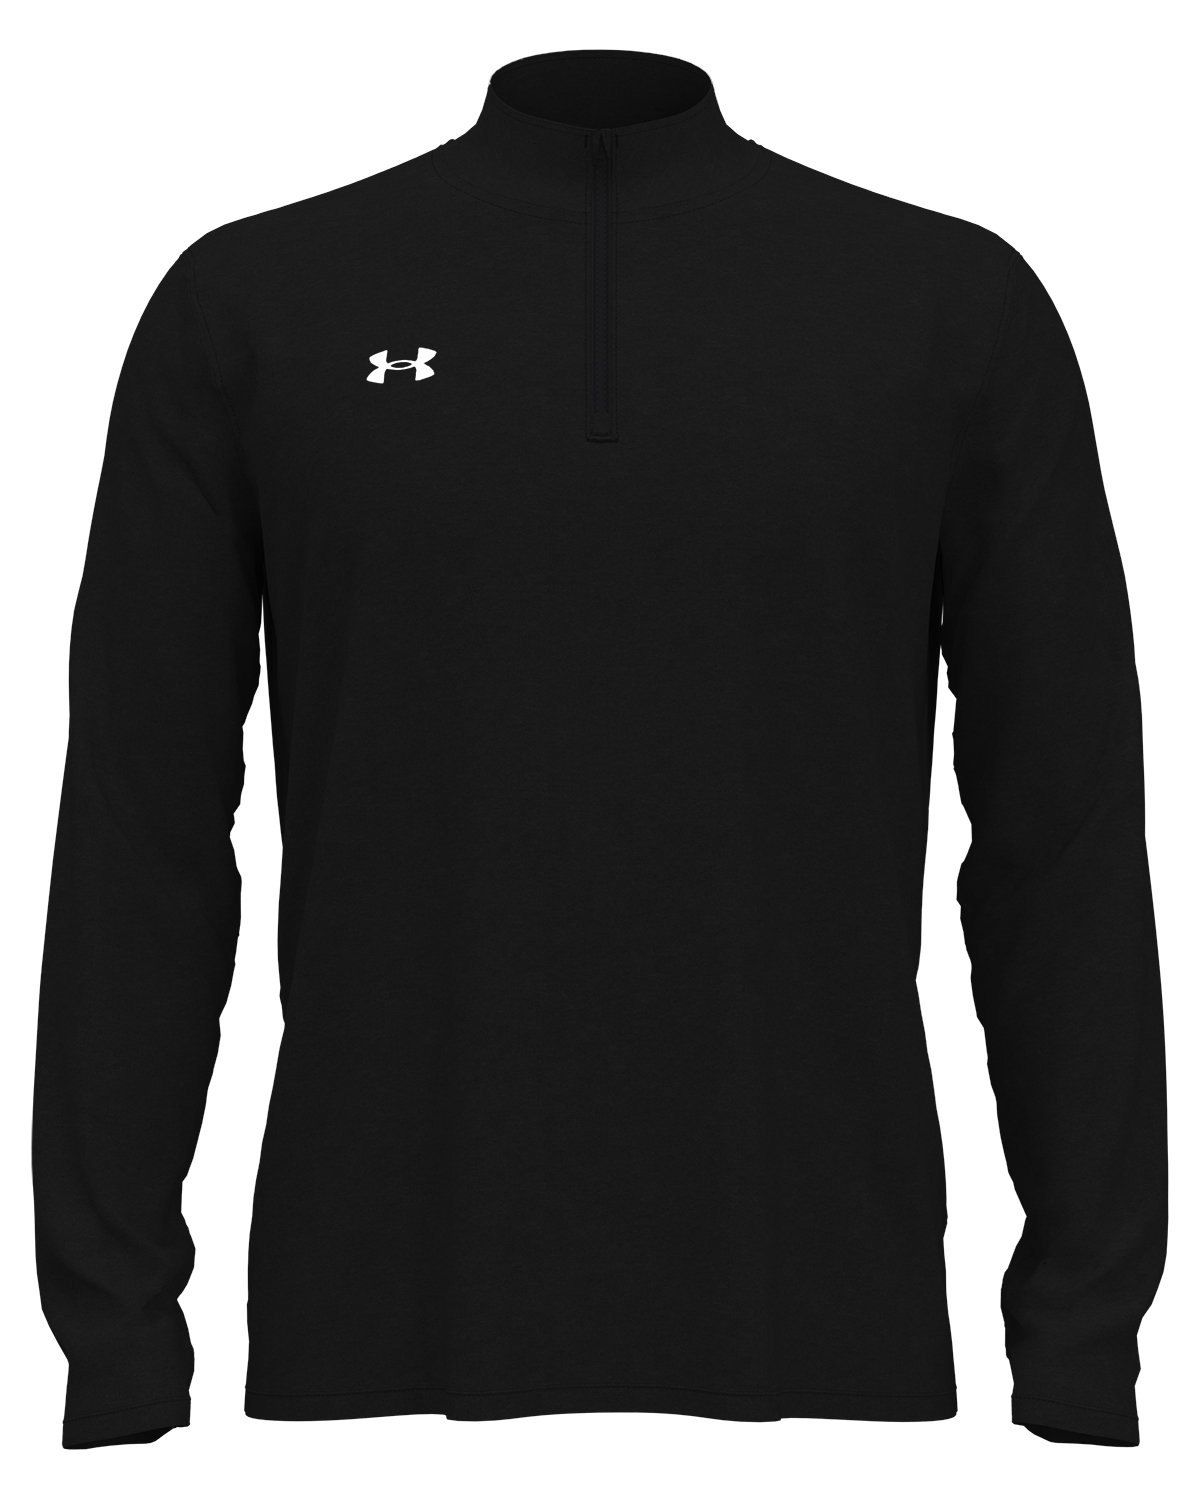 Under Armour Athletic Pants Men's Black New with Tags 2XL - Locker Room  Direct